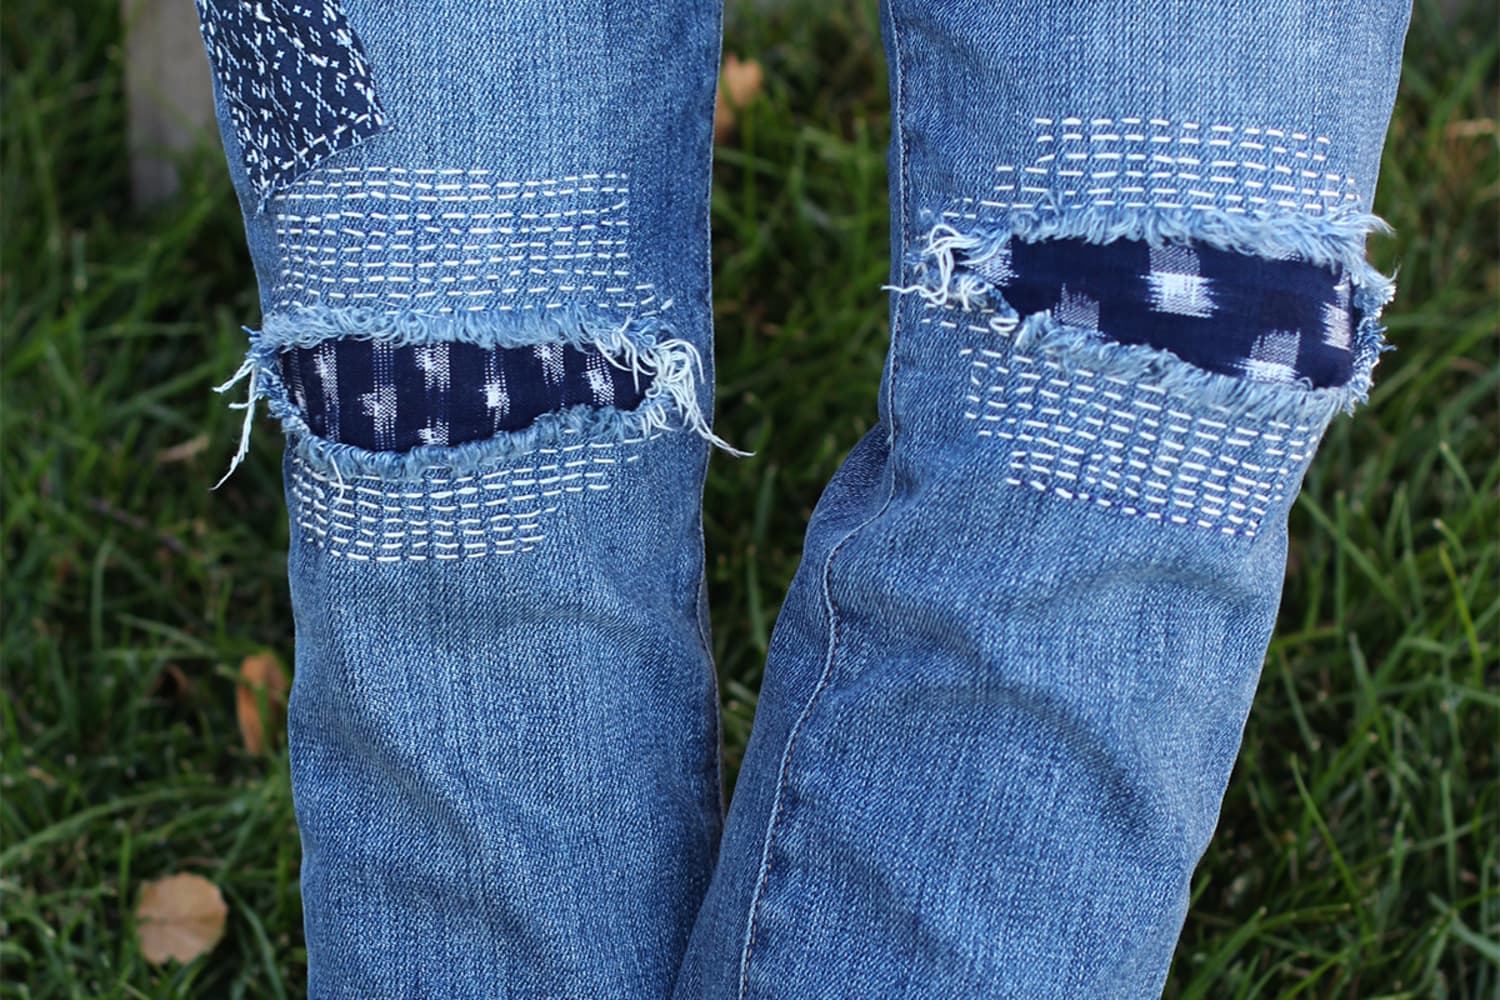 Unique ways to patch jeans  Diy and crafts sewing, Knee patches, How to  patch jeans